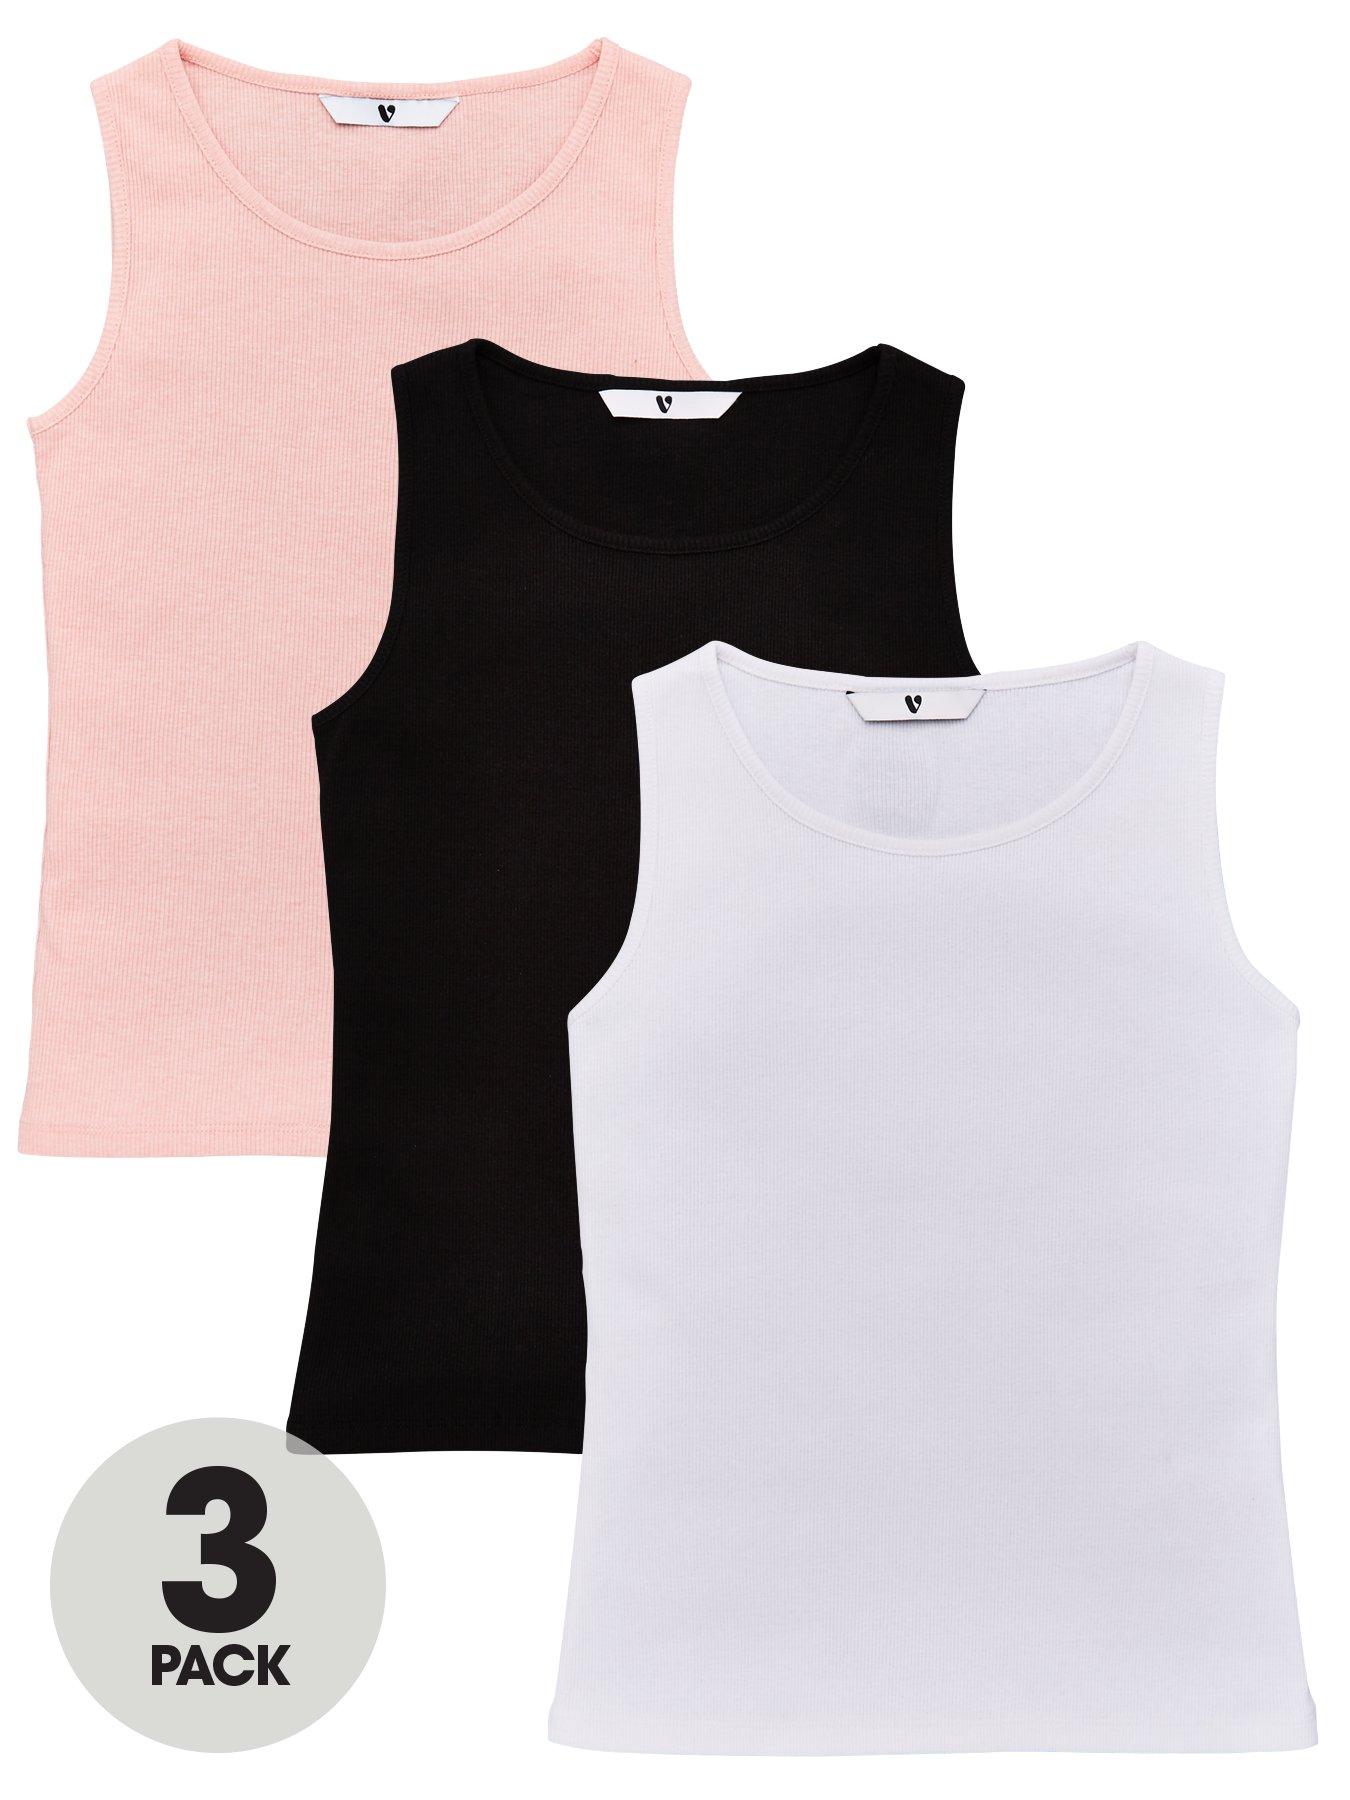 Studio 3 12 Pieces Pack Women's Ribbed 100% Cotton Tank Tops